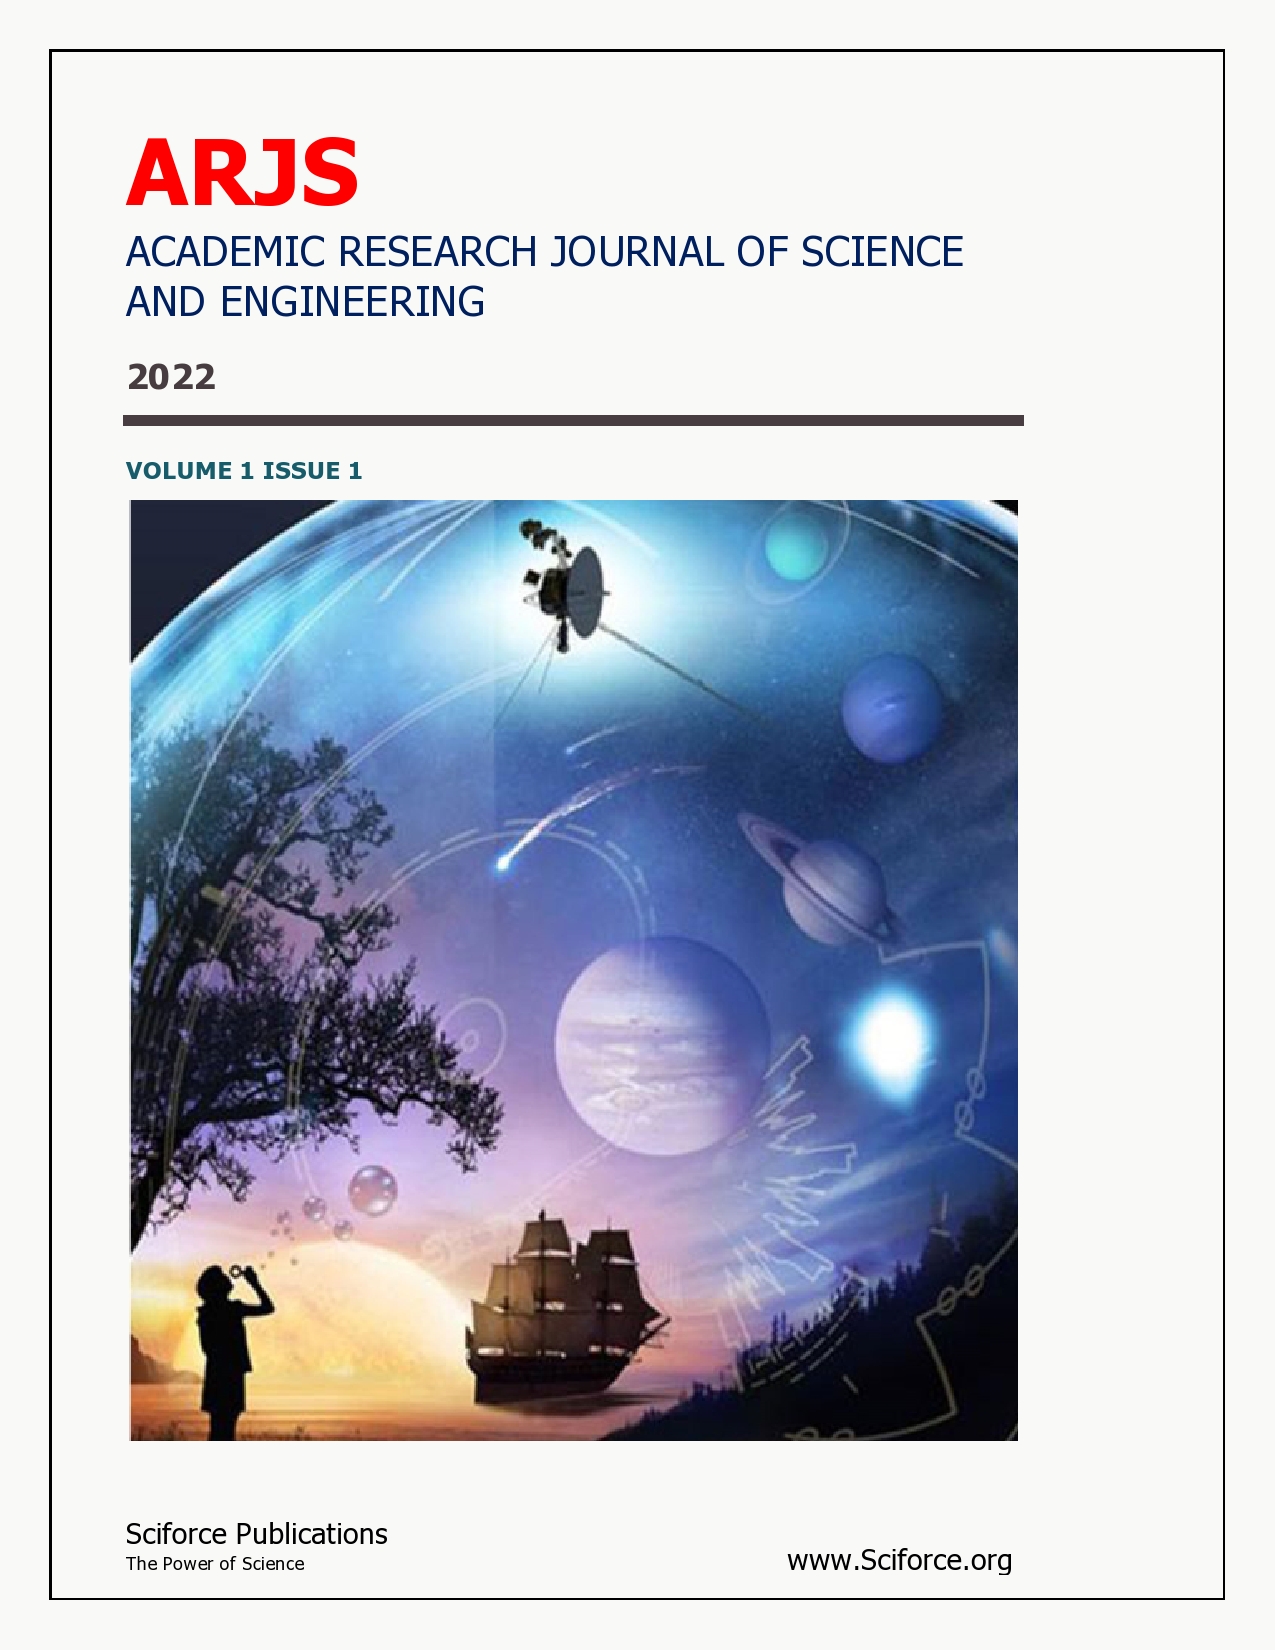 Academic Research Journal of Science and Engineering